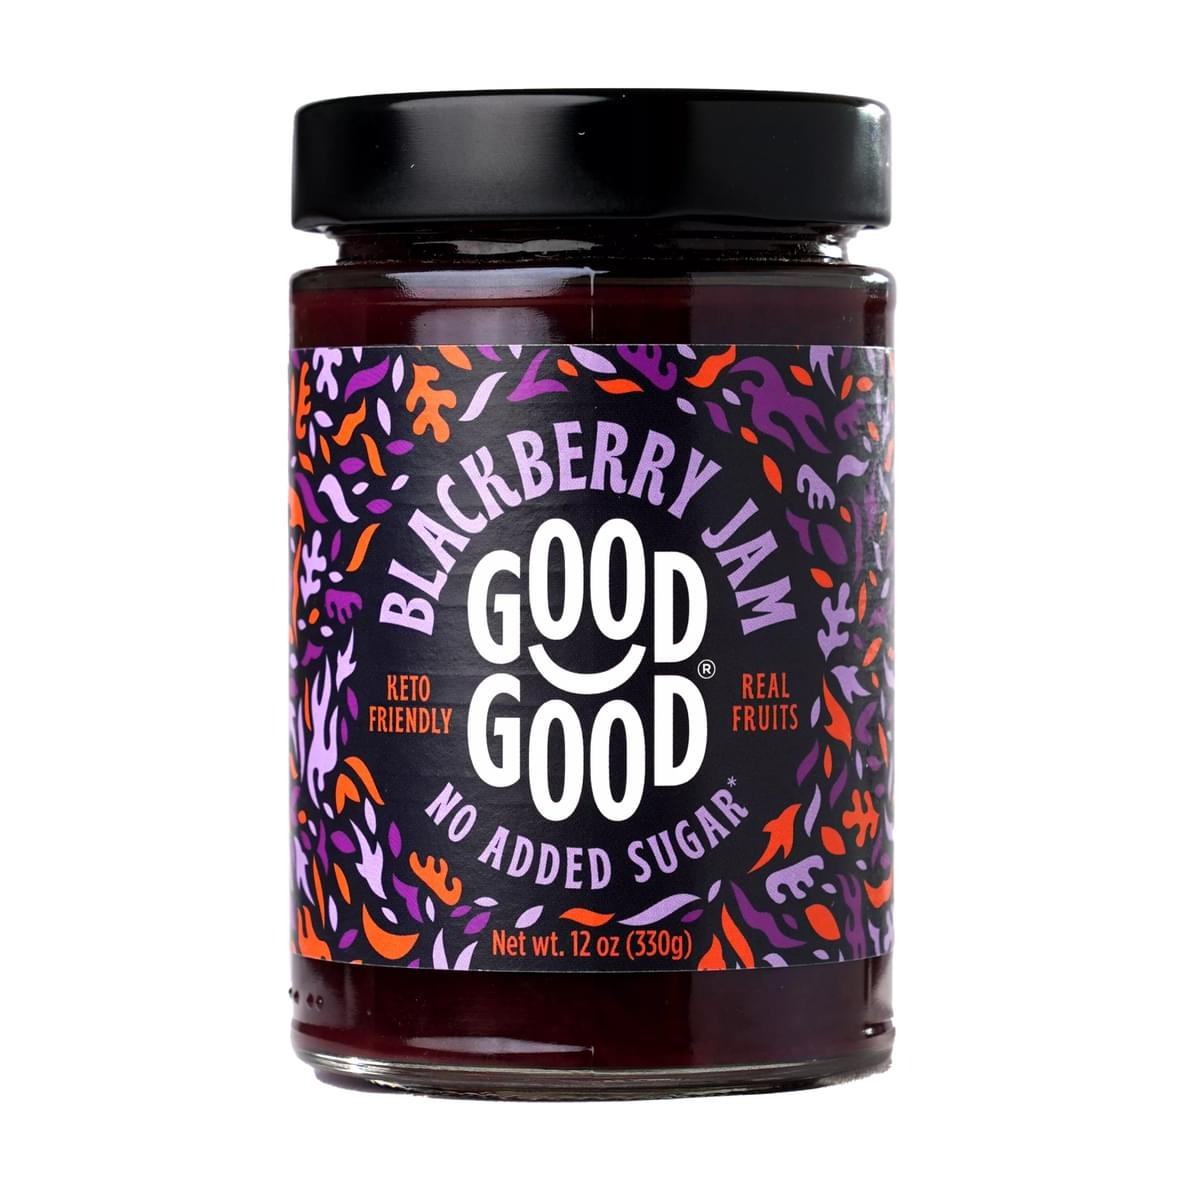 GOOD GOOD Launches Latest Pantry Staple, Blackberry Jam, Adding to Its Essential Collection of No Added Sugar Jam 135